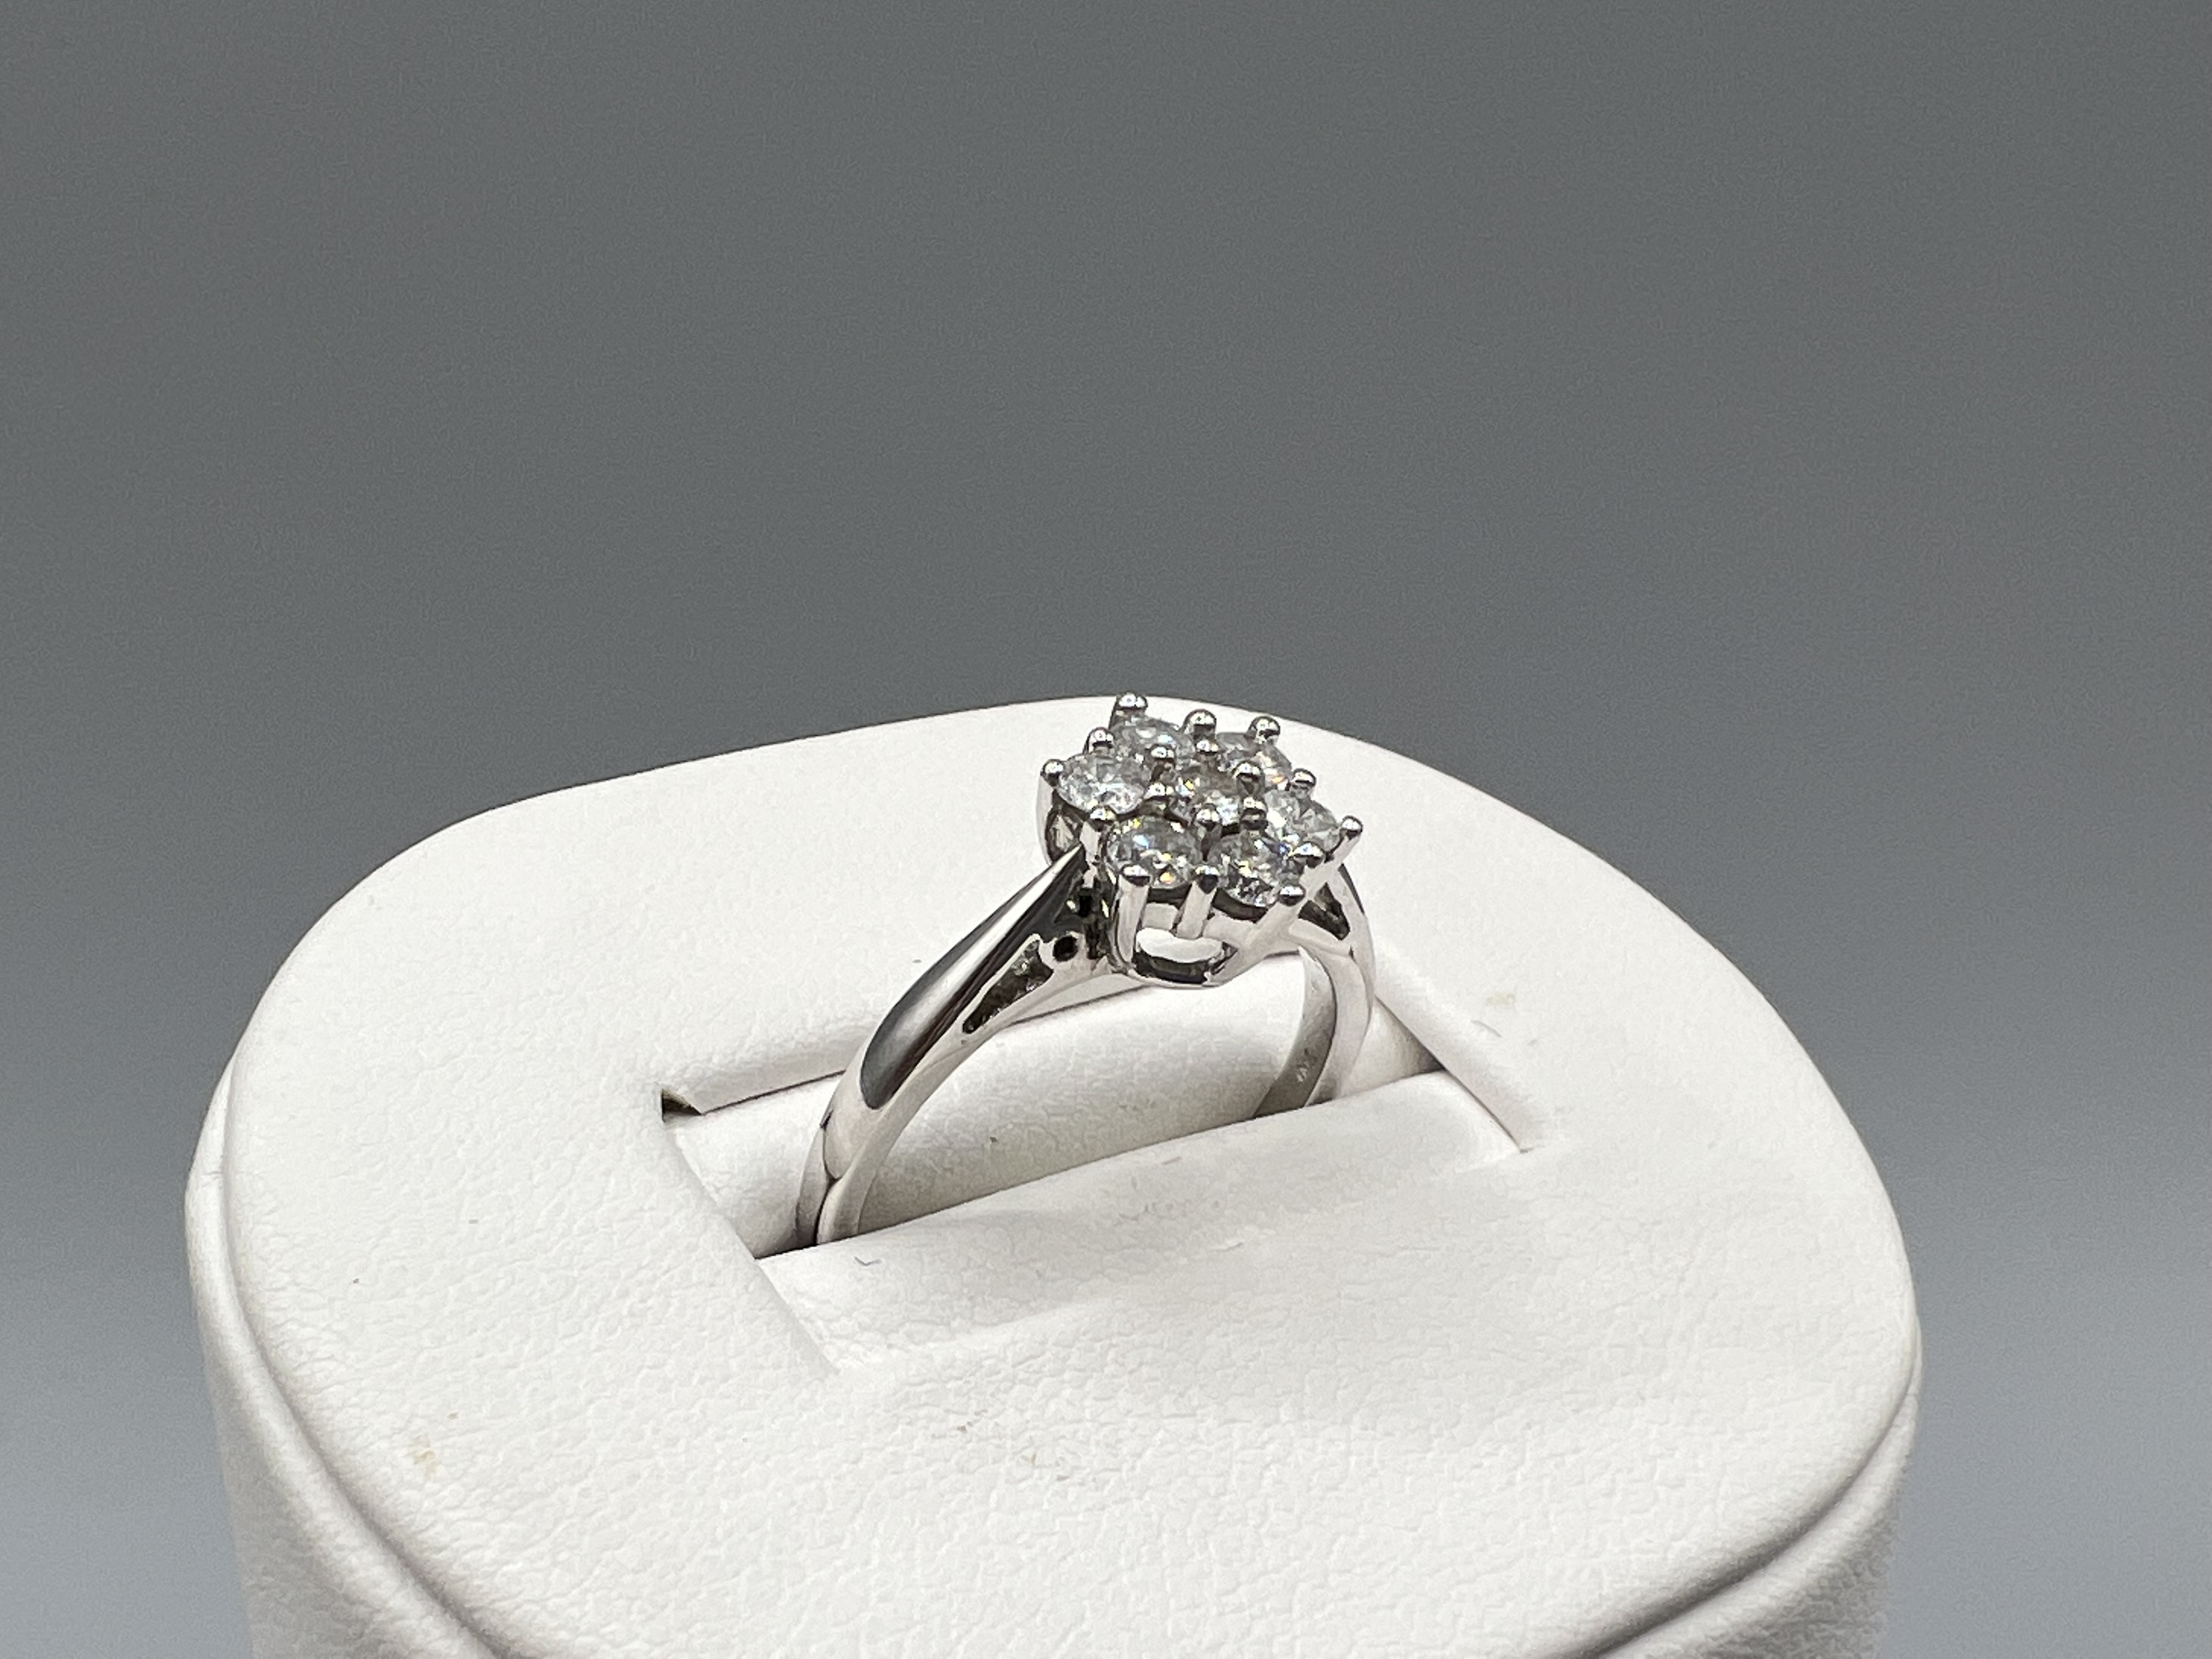 18ct White Gold & 7 Stone 1/2 Diamond Cluster Ring - 3.6grams Size N 1/2 - Image 2 of 3